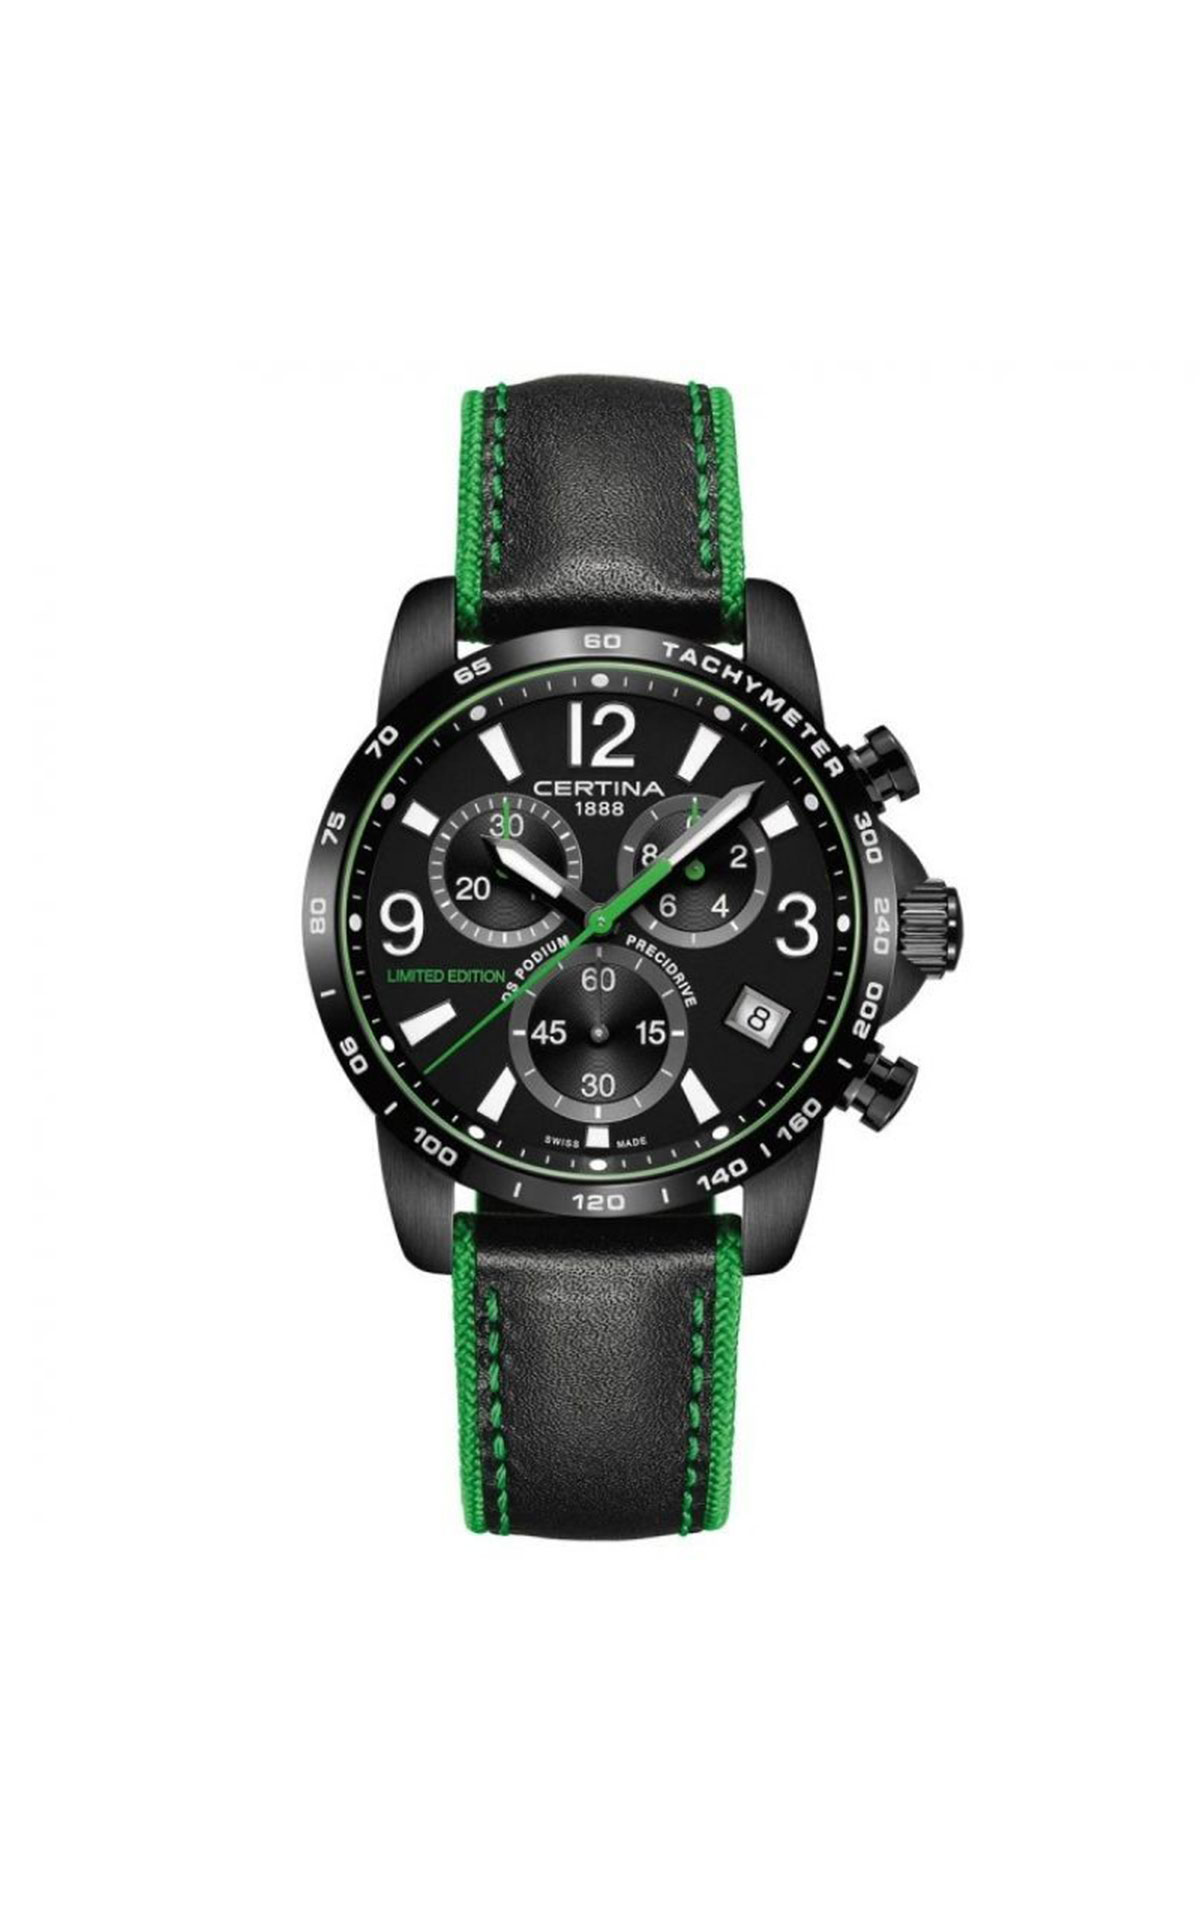 Hour Passion Certina green and black watch from Bicester Village